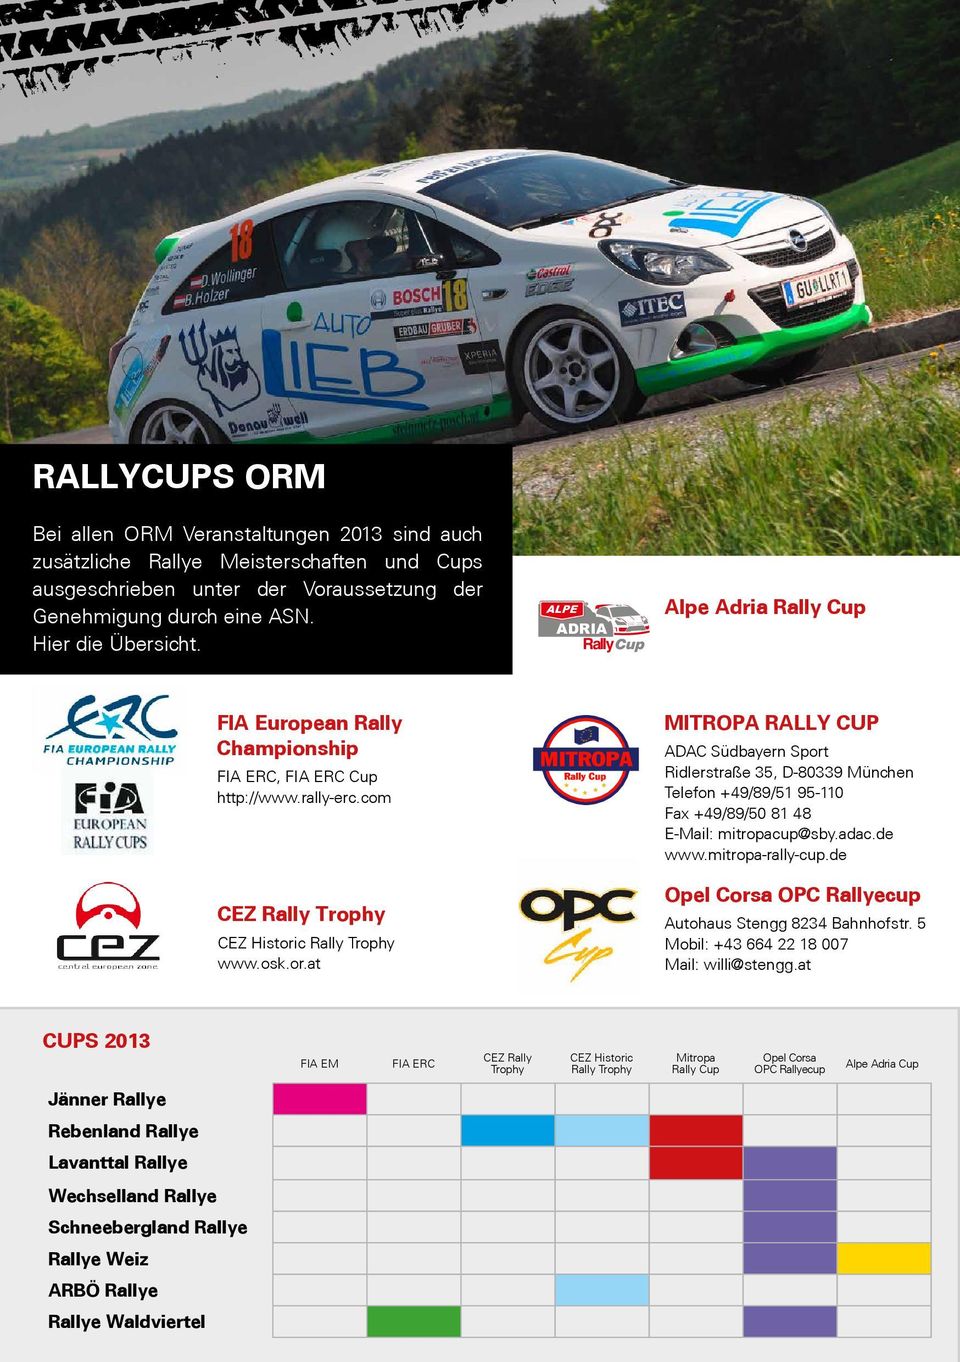 c Rally Trophy www.osk.or.at MITROPA RALLY CUP ADAC Südbayern Sport Ridlerstraße 35, D-80339 München Telefon +49/89/51 95-110 Fax +49/89/50 81 48 E-Mail: mitropacup@sby.adac.de www.mitropa-rally-cup.